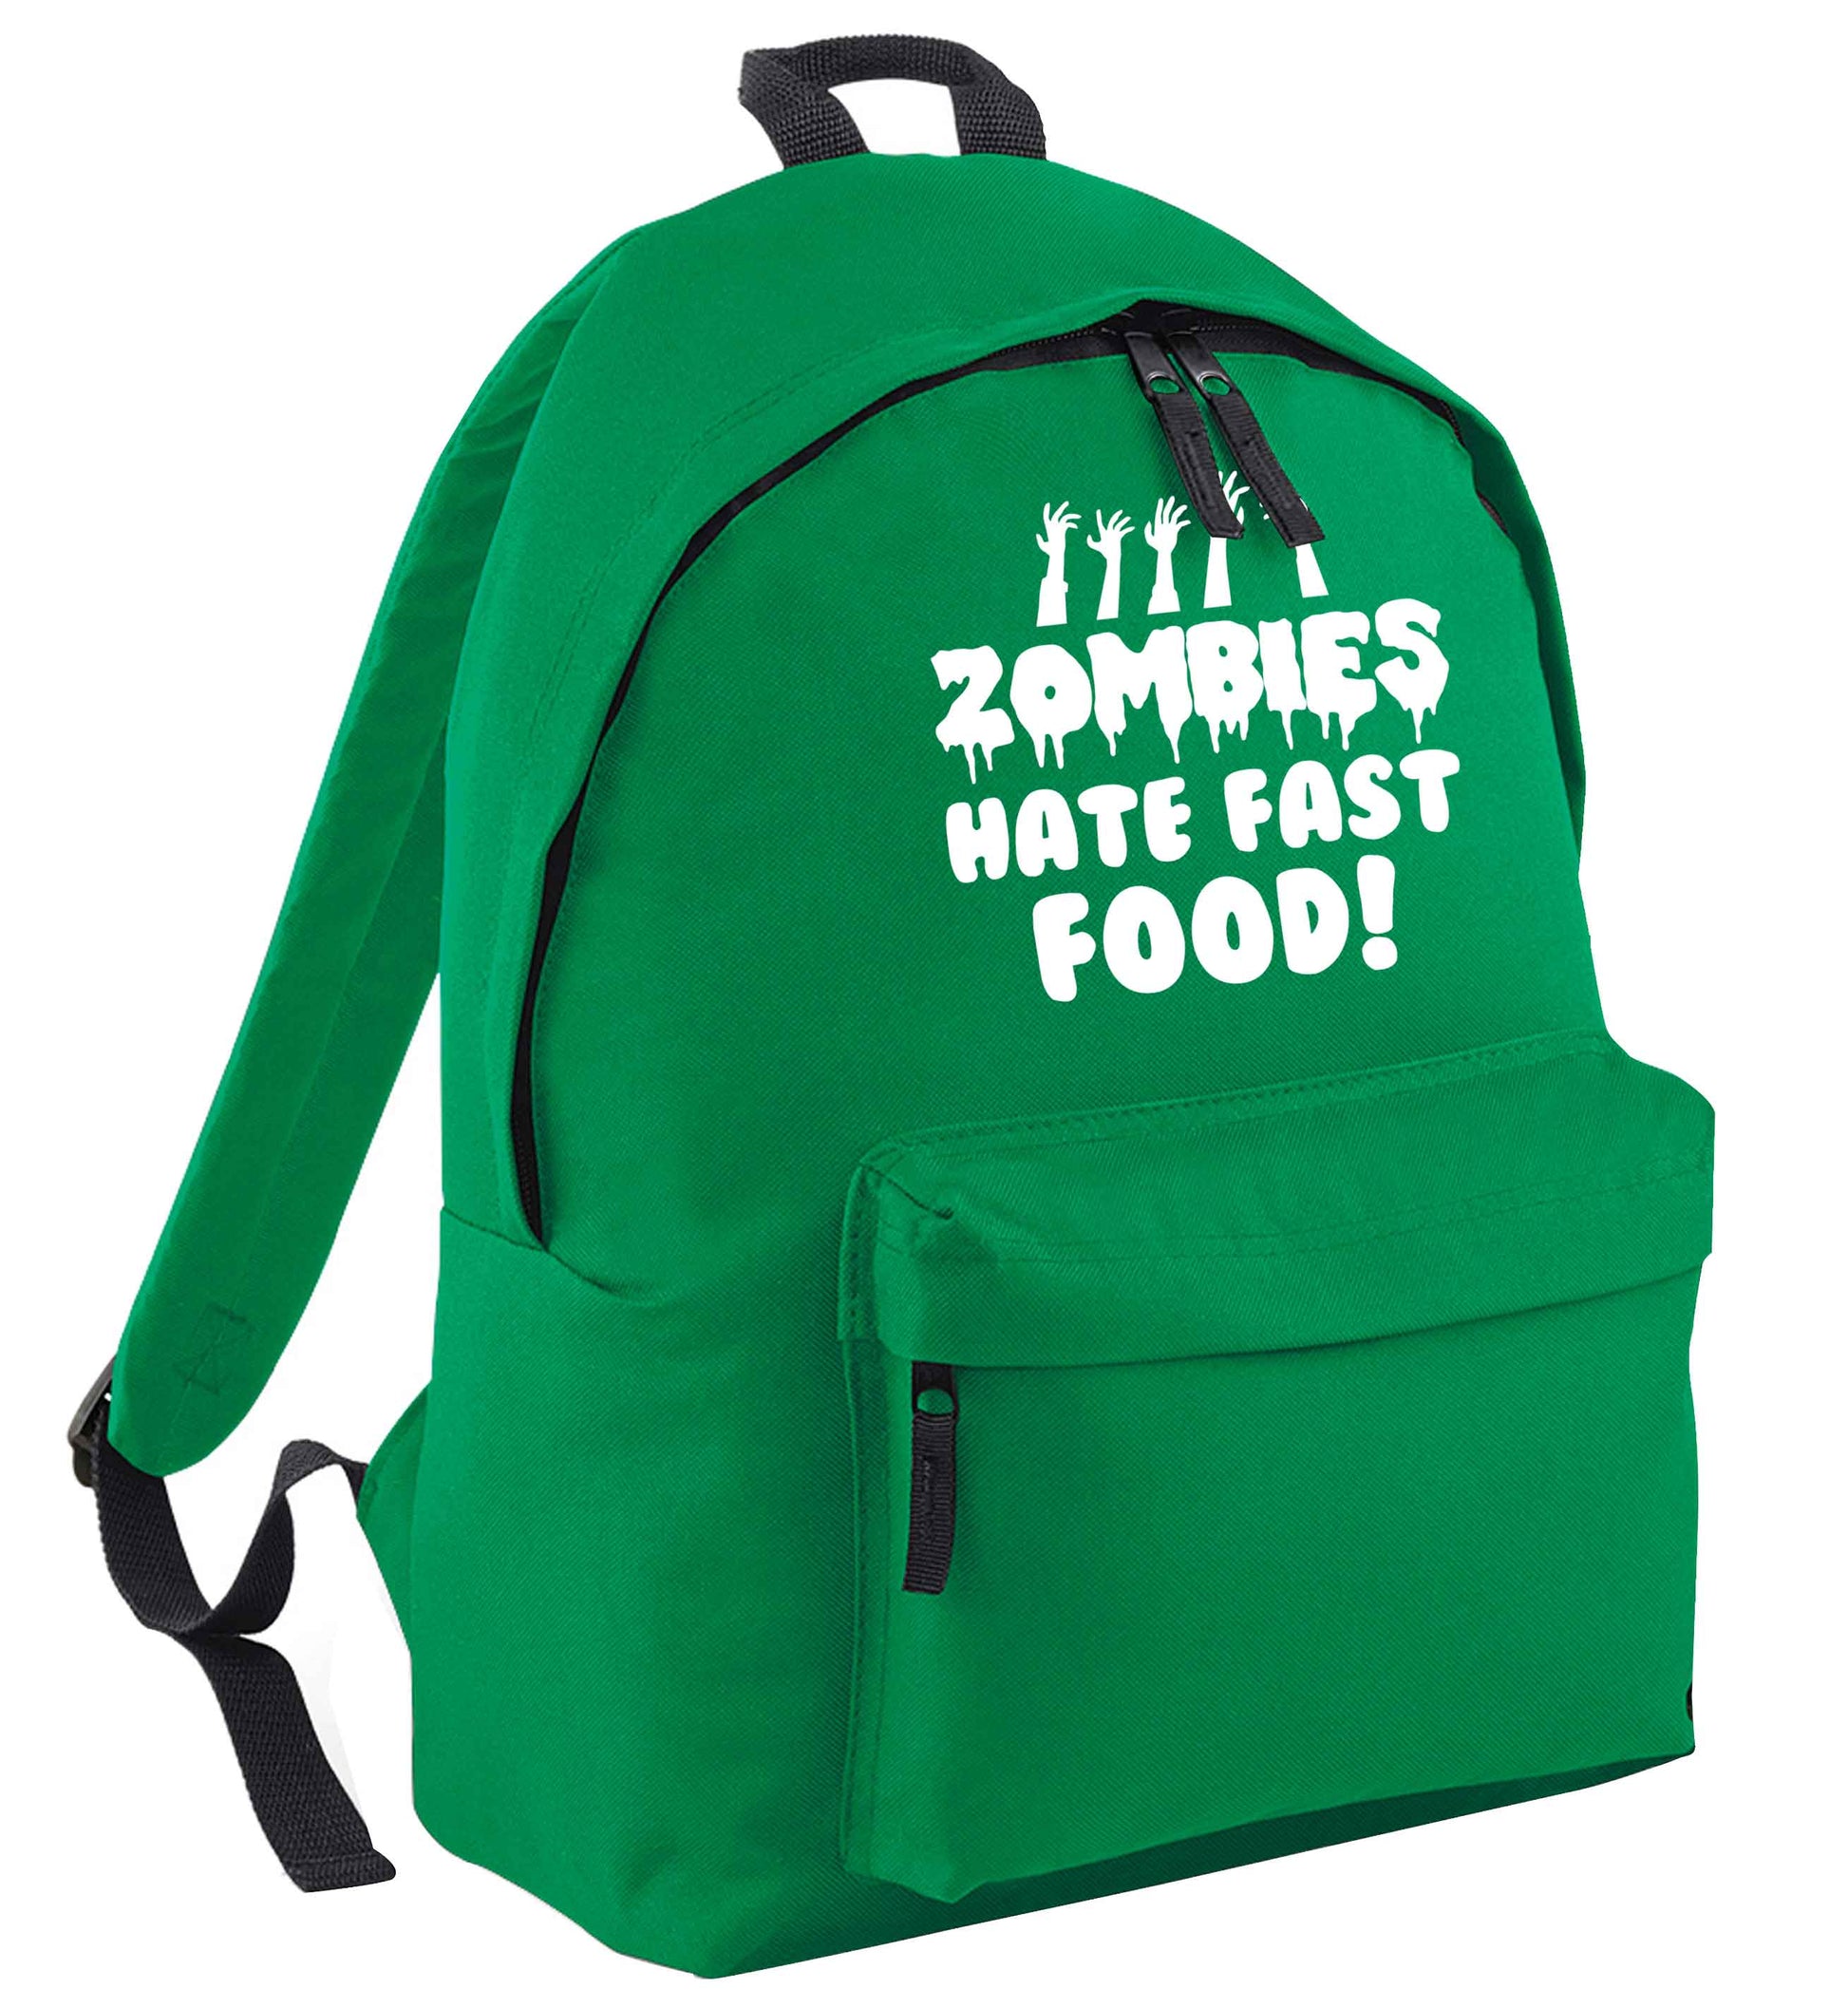 Zombies hate fast food green adults backpack